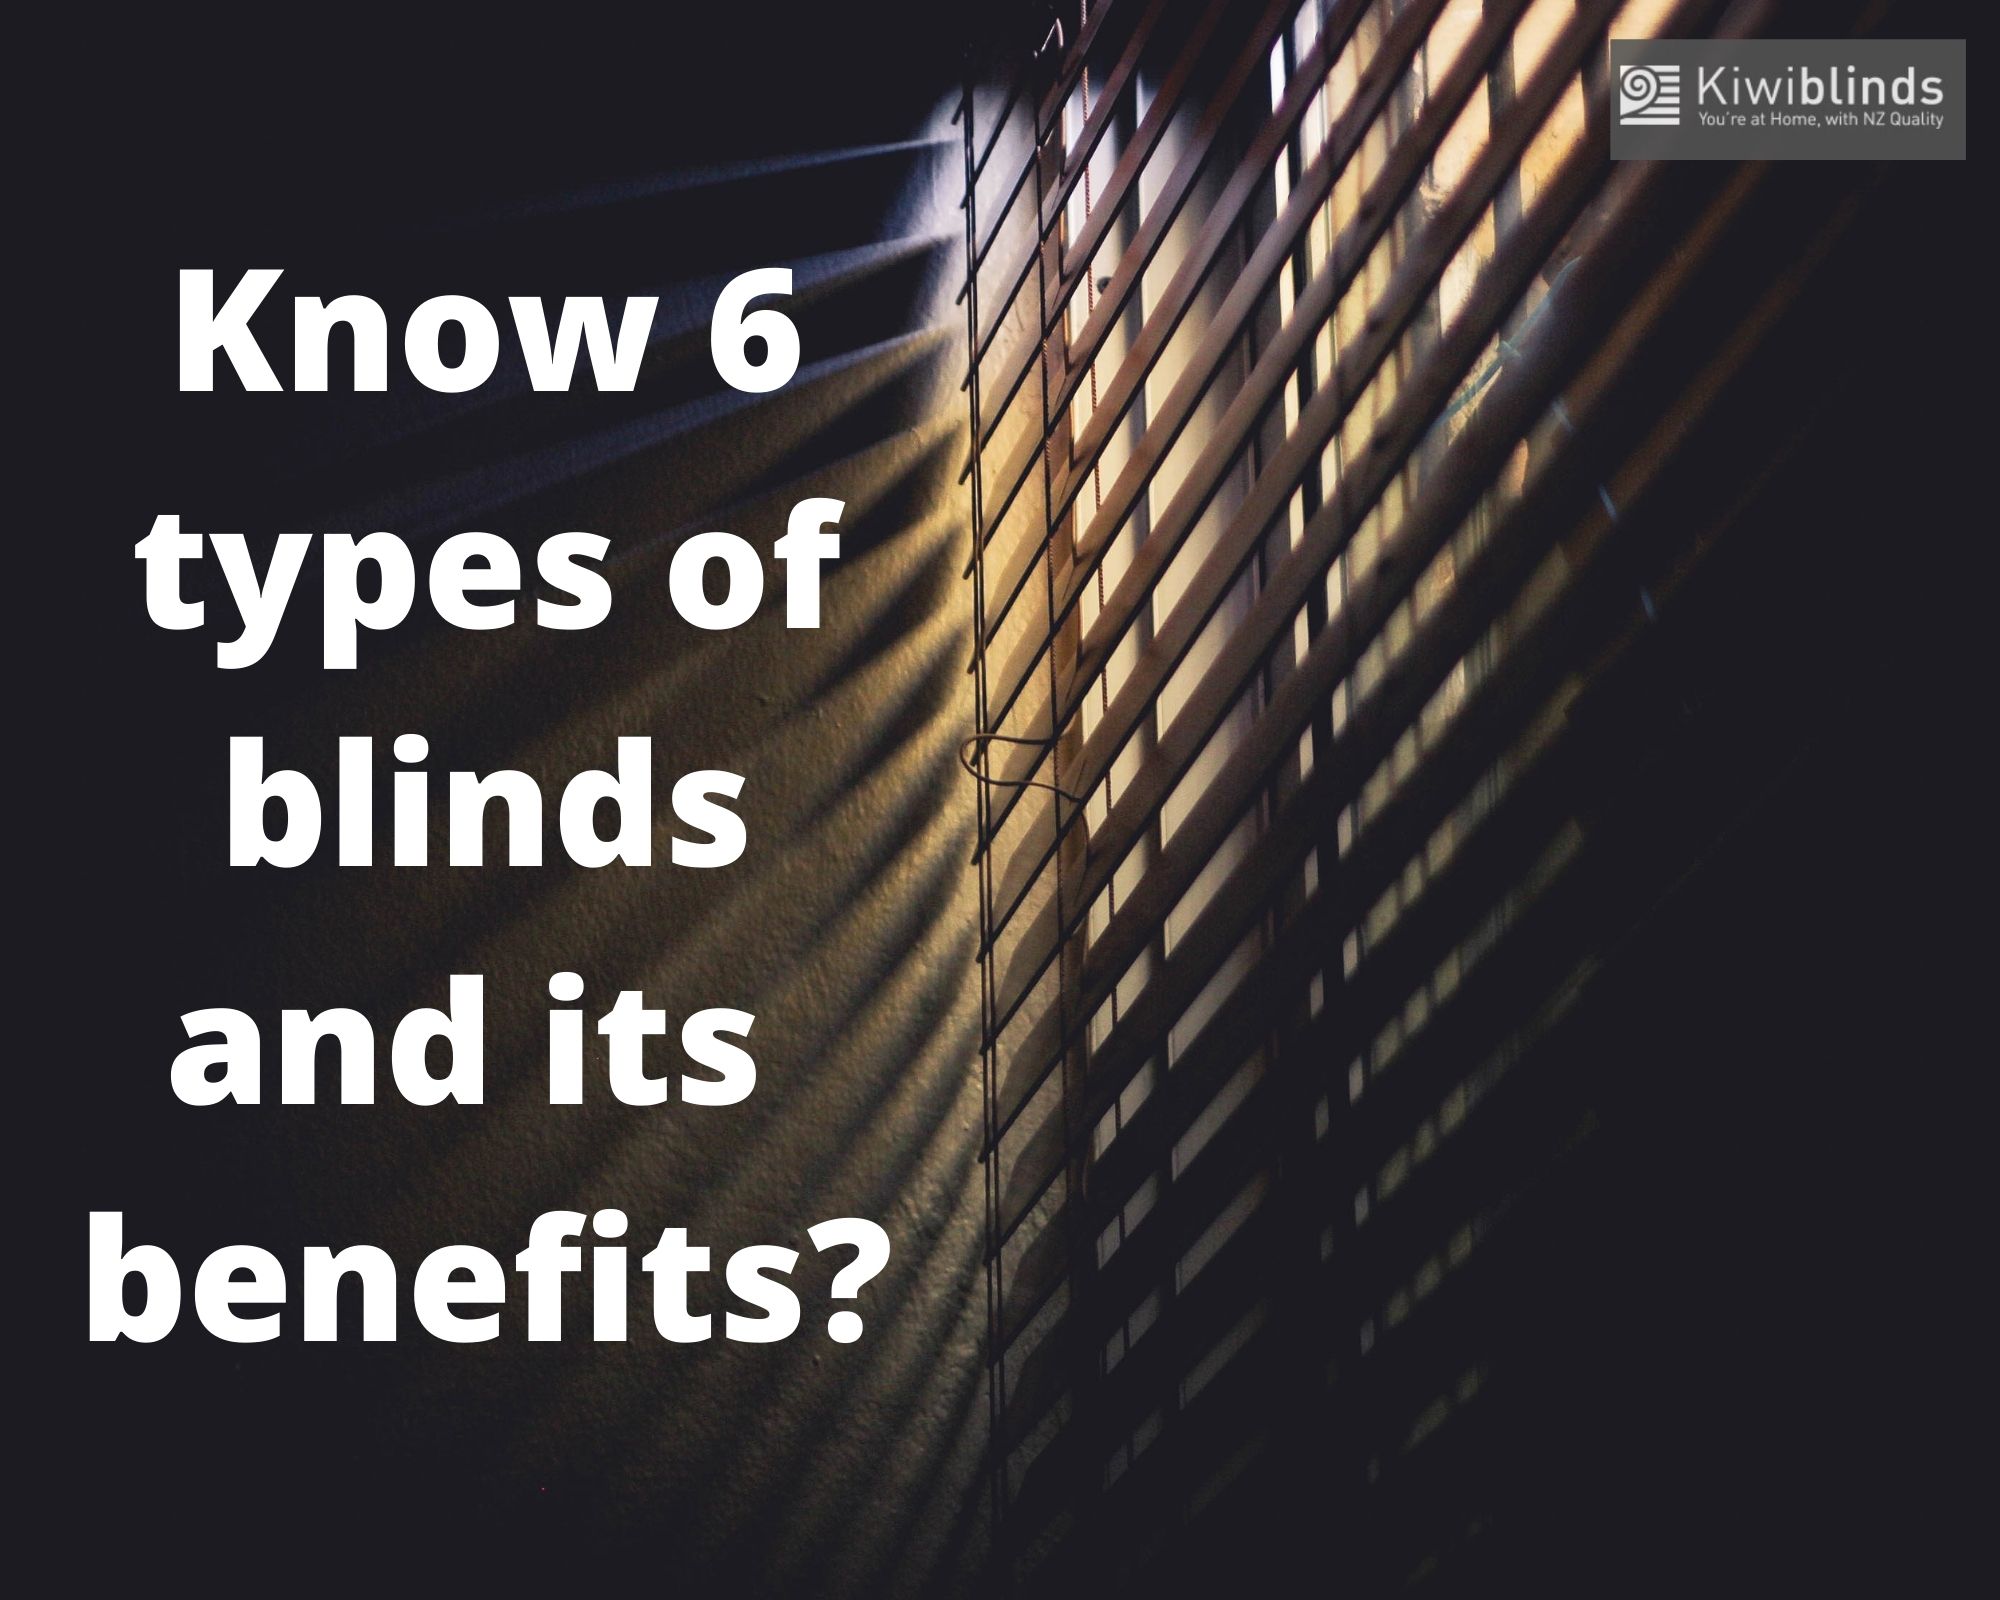 Know 6 types of blinds and its benefits?